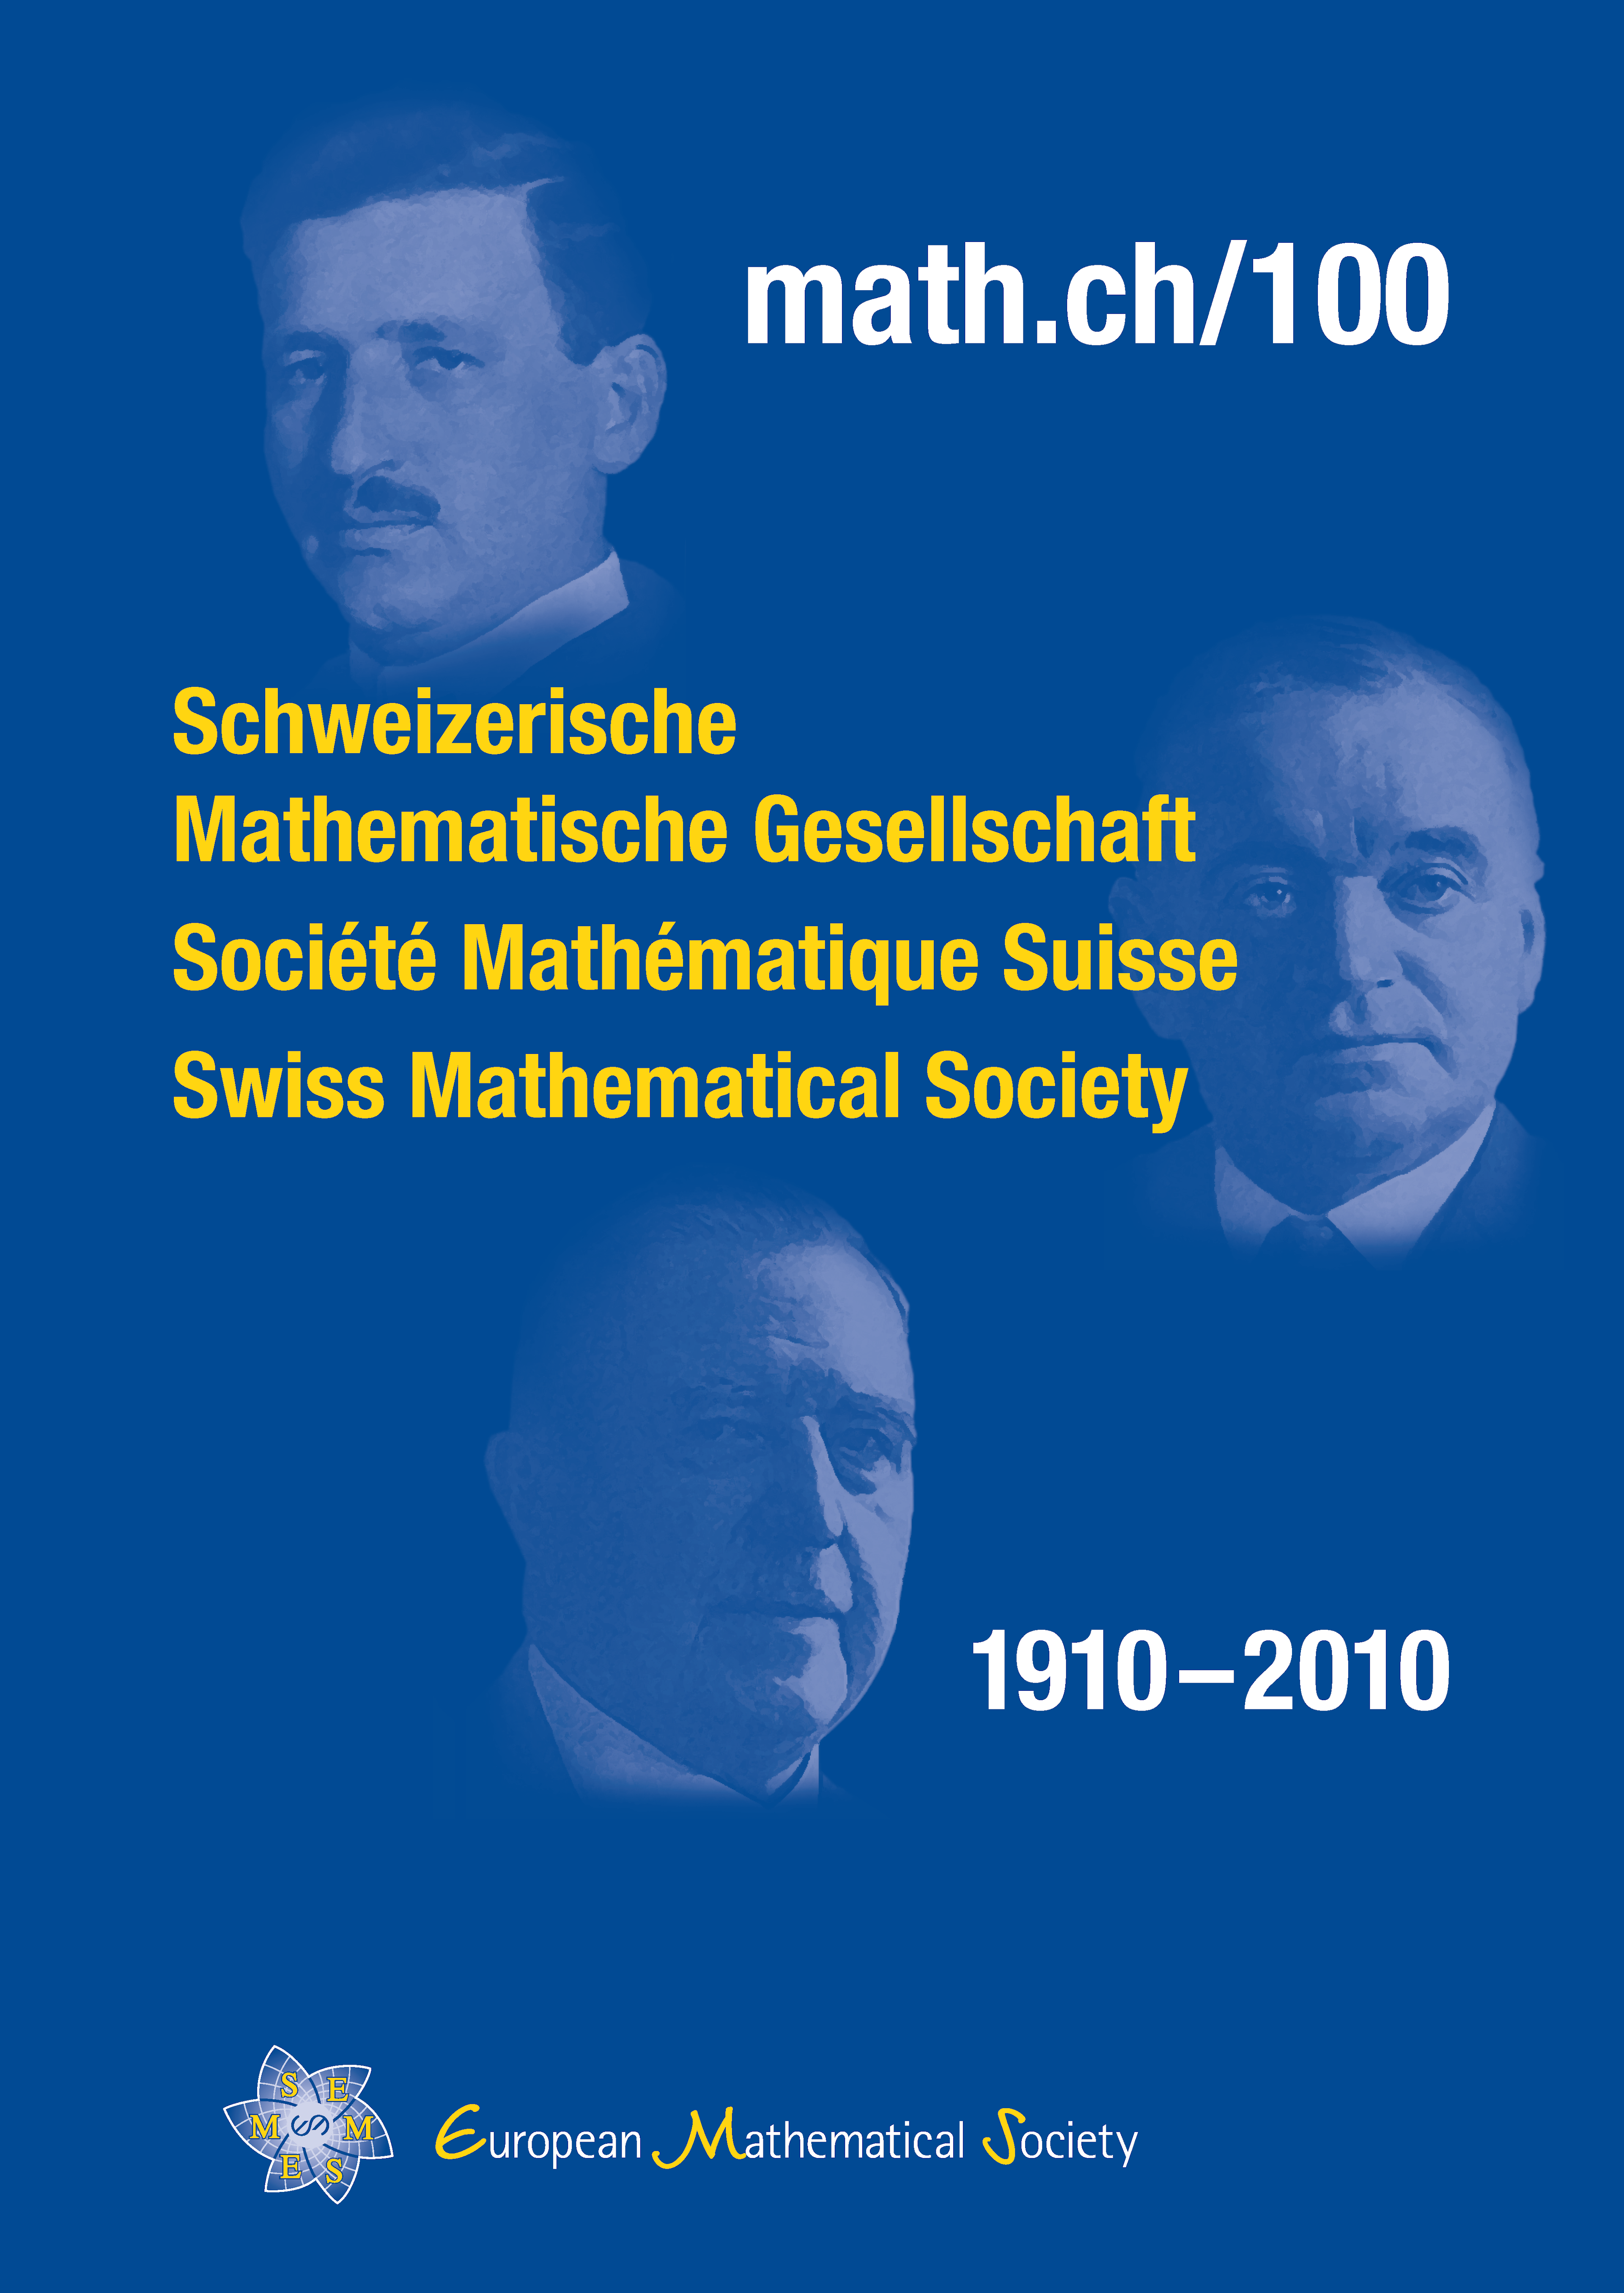 Numerical analysis in Zurich – 50 years ago cover